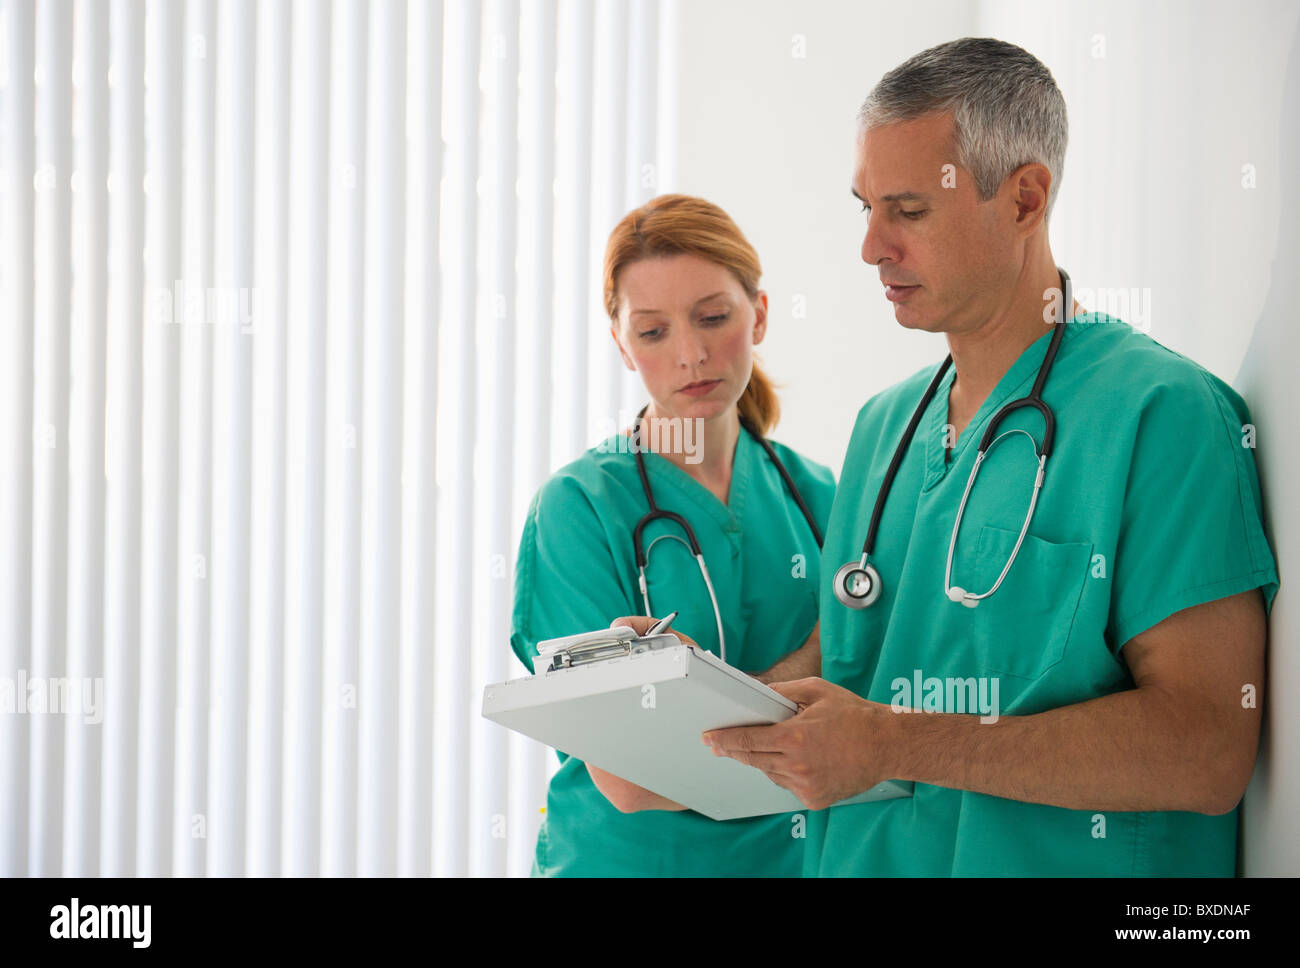 Healthcare professionals looking at medical chart Stock Photo